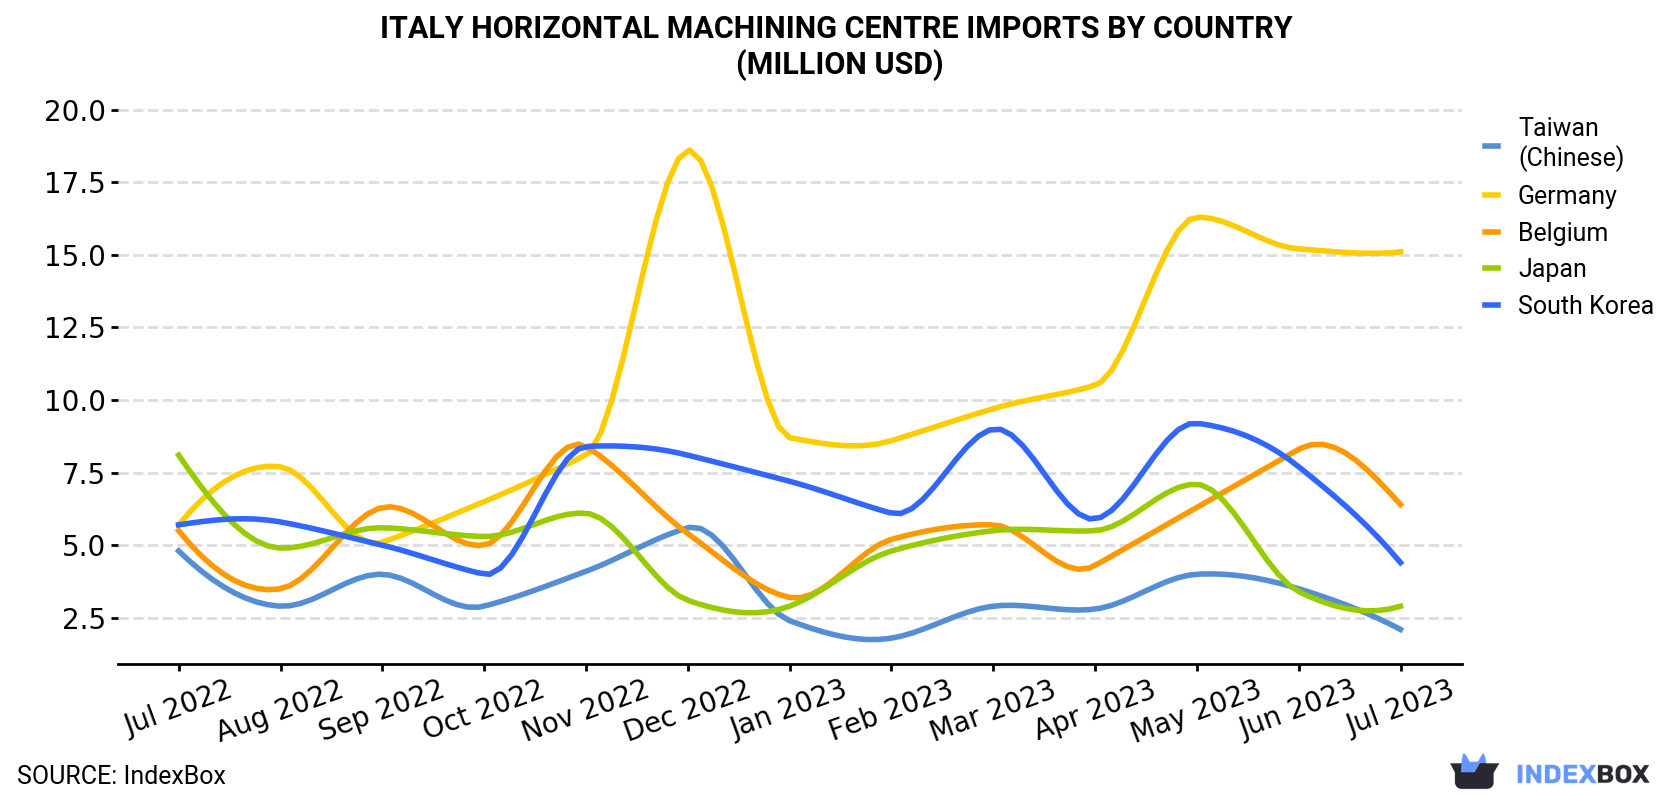 Italy Horizontal Machining Centre Imports By Country (Million USD)